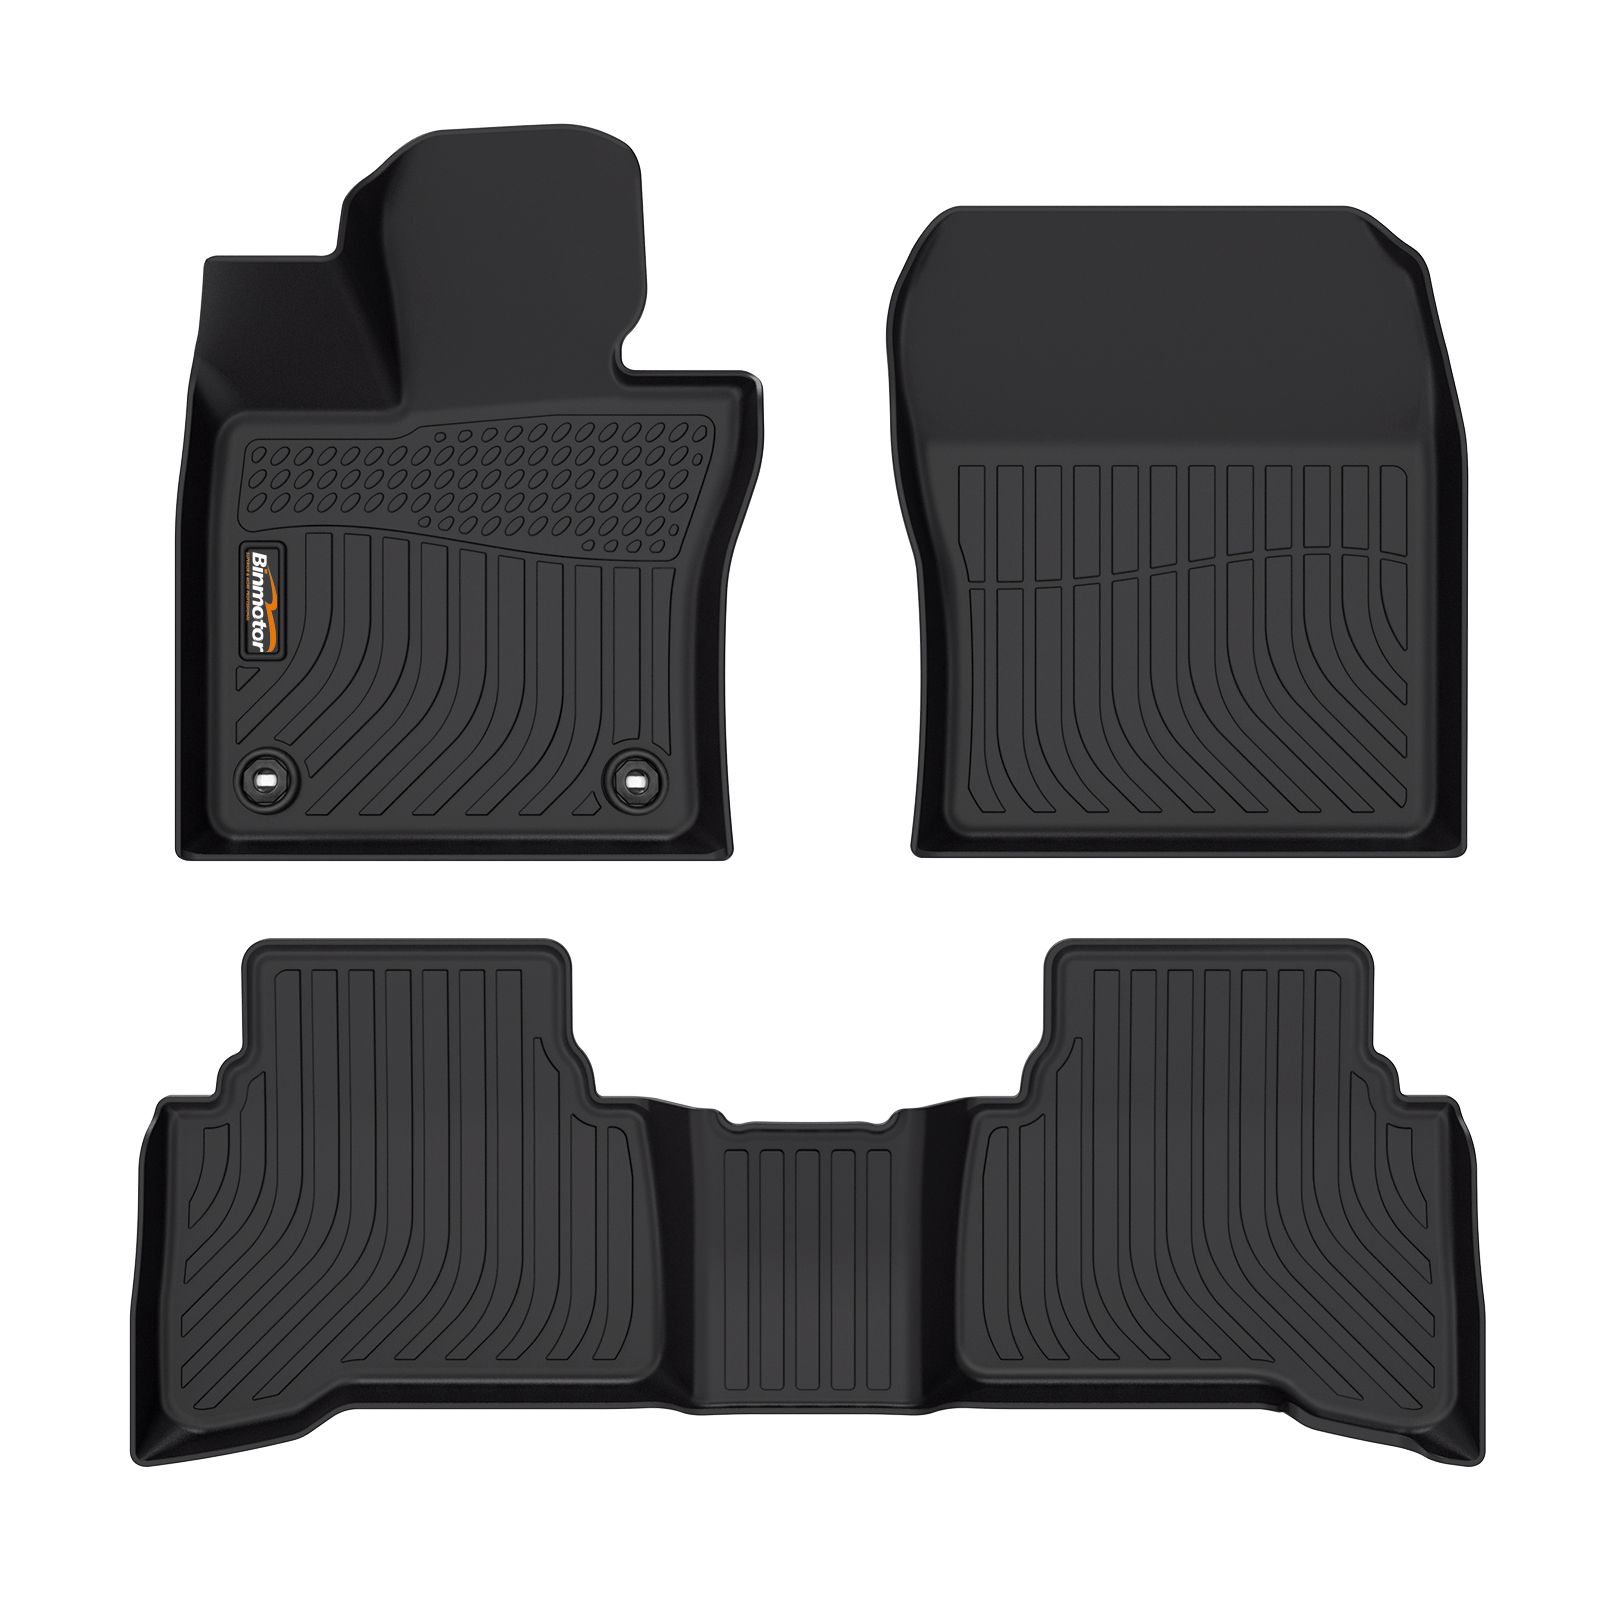 Binmotor-Floor Mats for All Weather Floor Mats for Toyota Prius, 1st & 2nd Row Full Set, Heavy Duty Car Floor Liners（compatible year 2023-2024）